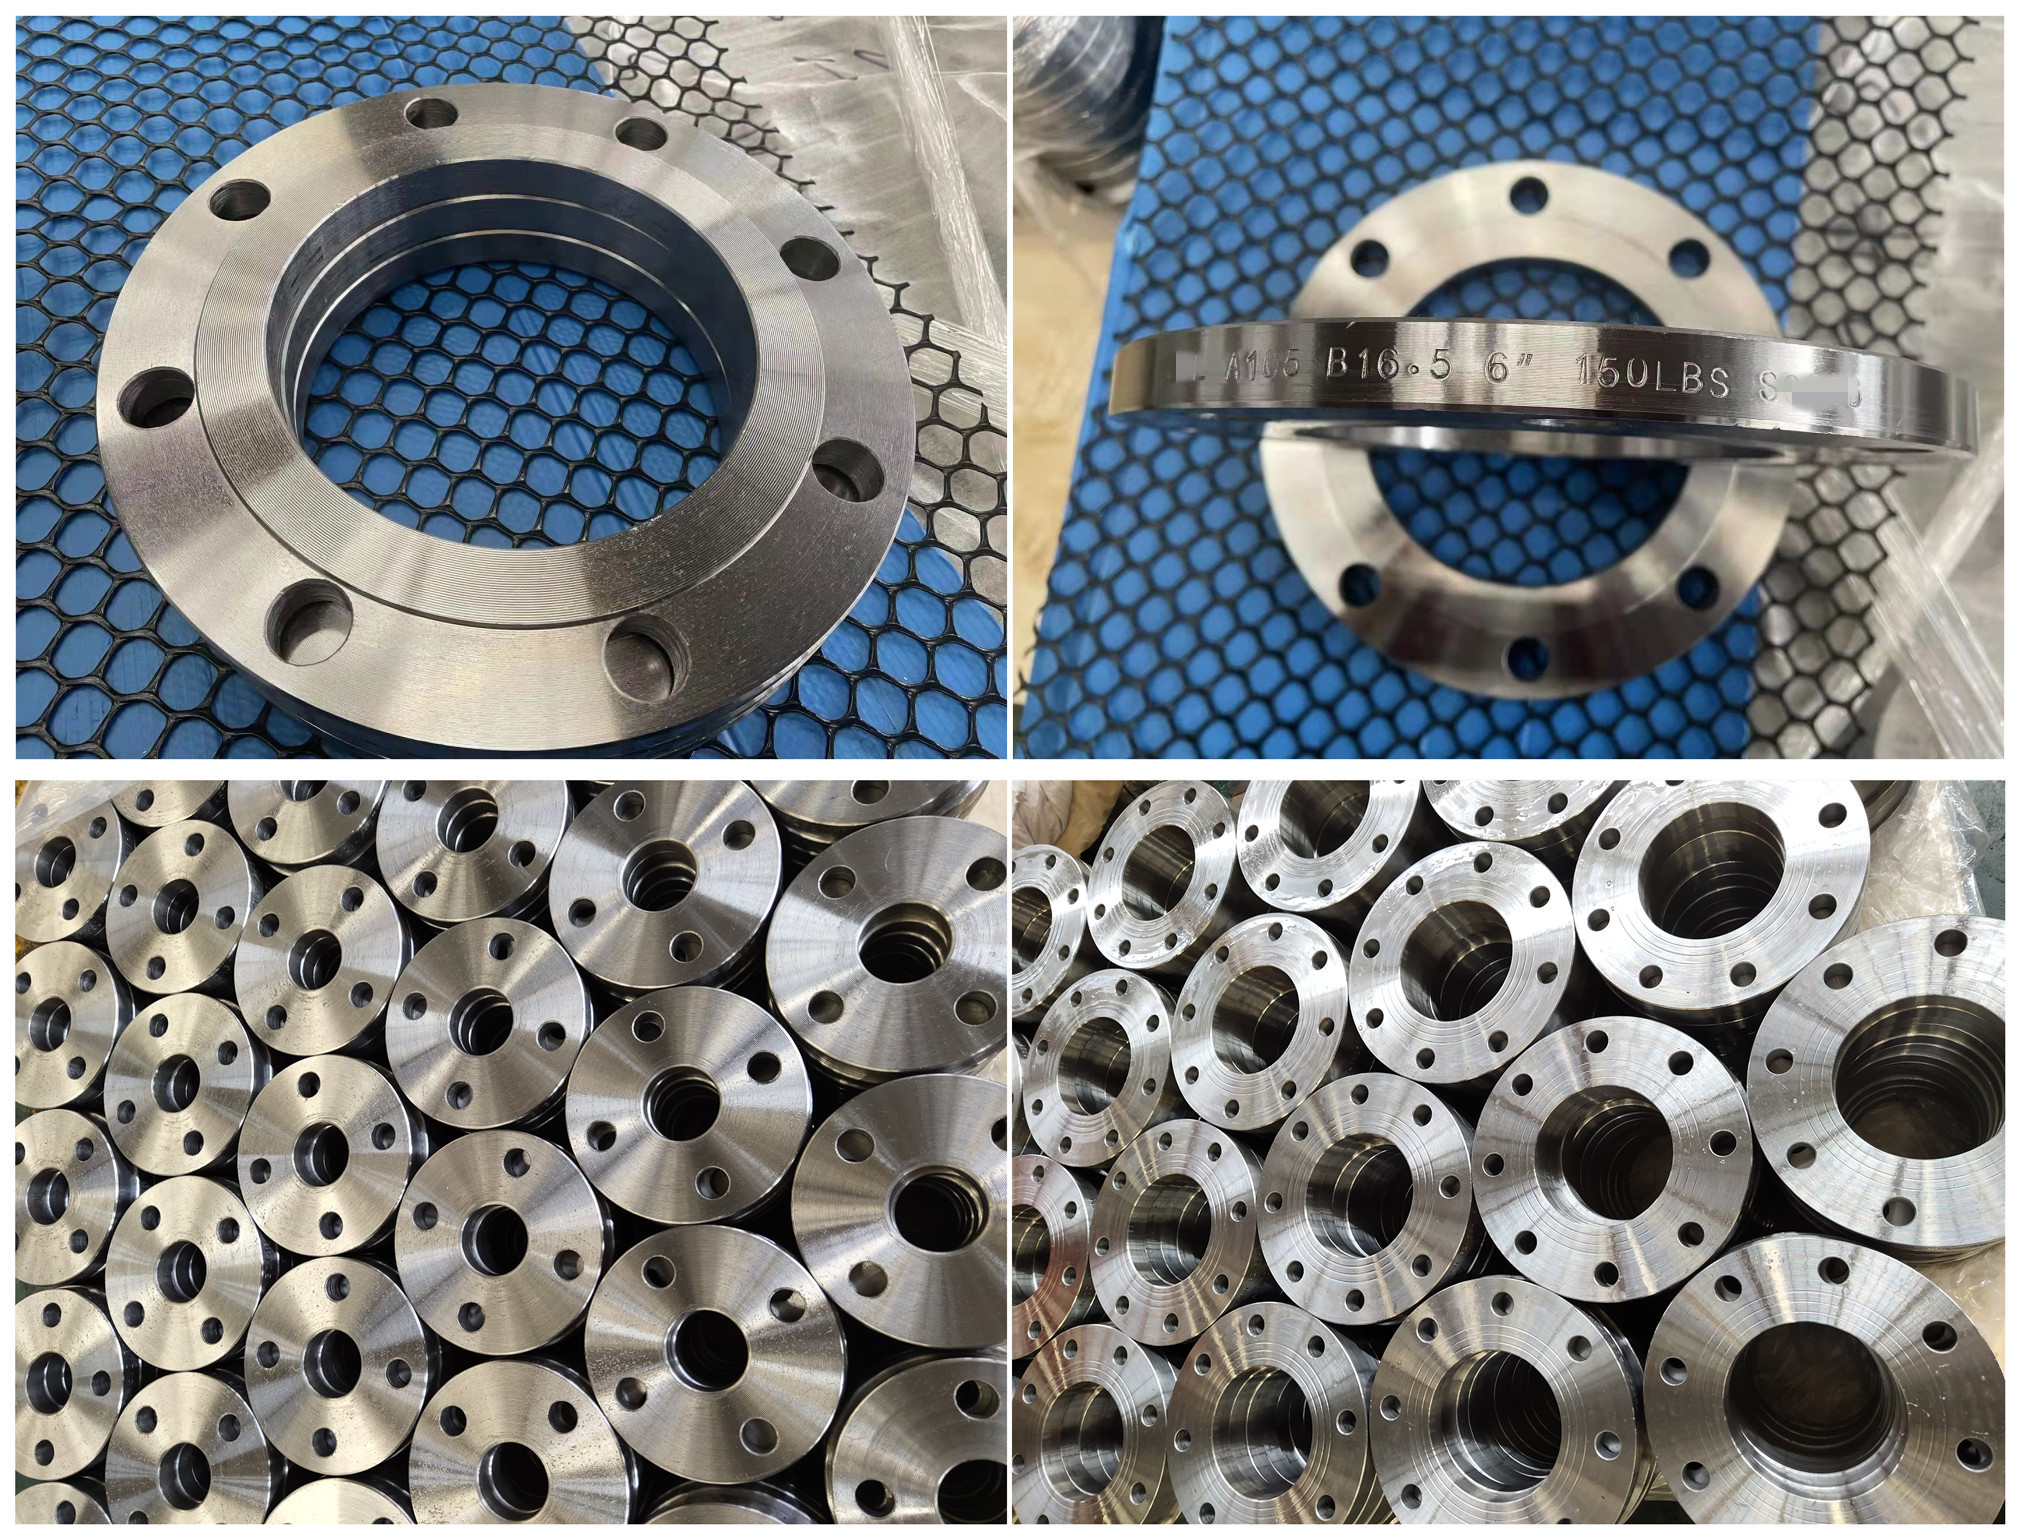 AG-High quality plate flanges at low prices